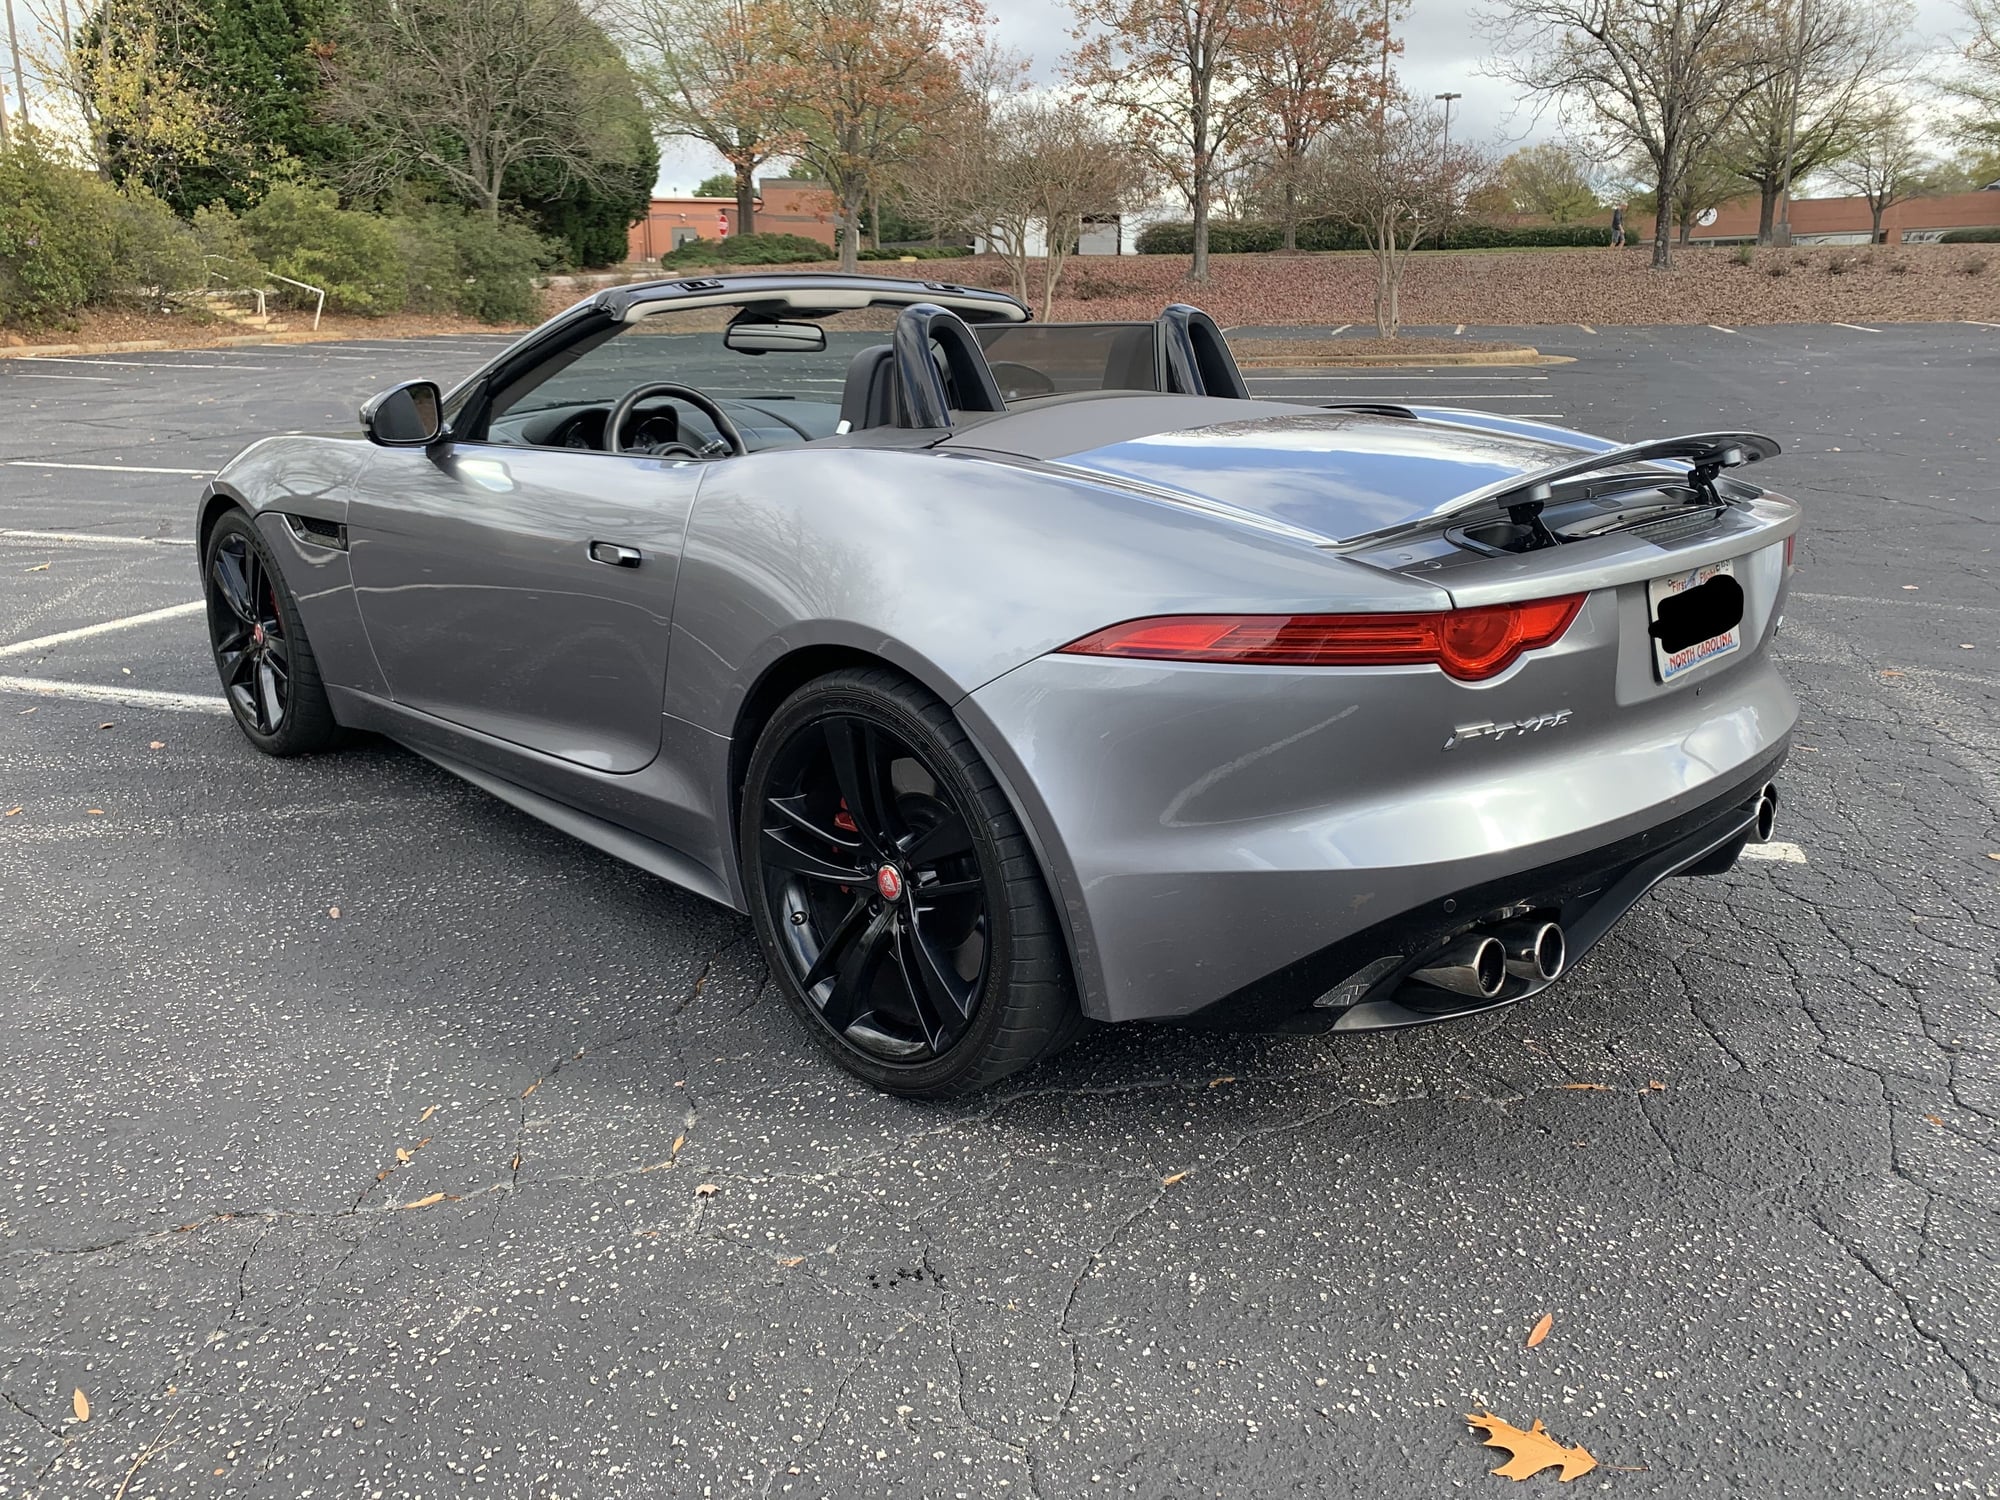 2015 Jaguar F-Type - 2015 F Type V8s 645 HP REDUCED!!! - Used - VIN sajwa6gl6fmk19011 - 32,500 Miles - 8 cyl - 2WD - Automatic - Convertible - Gray - Raleigh, NC 27612, United States